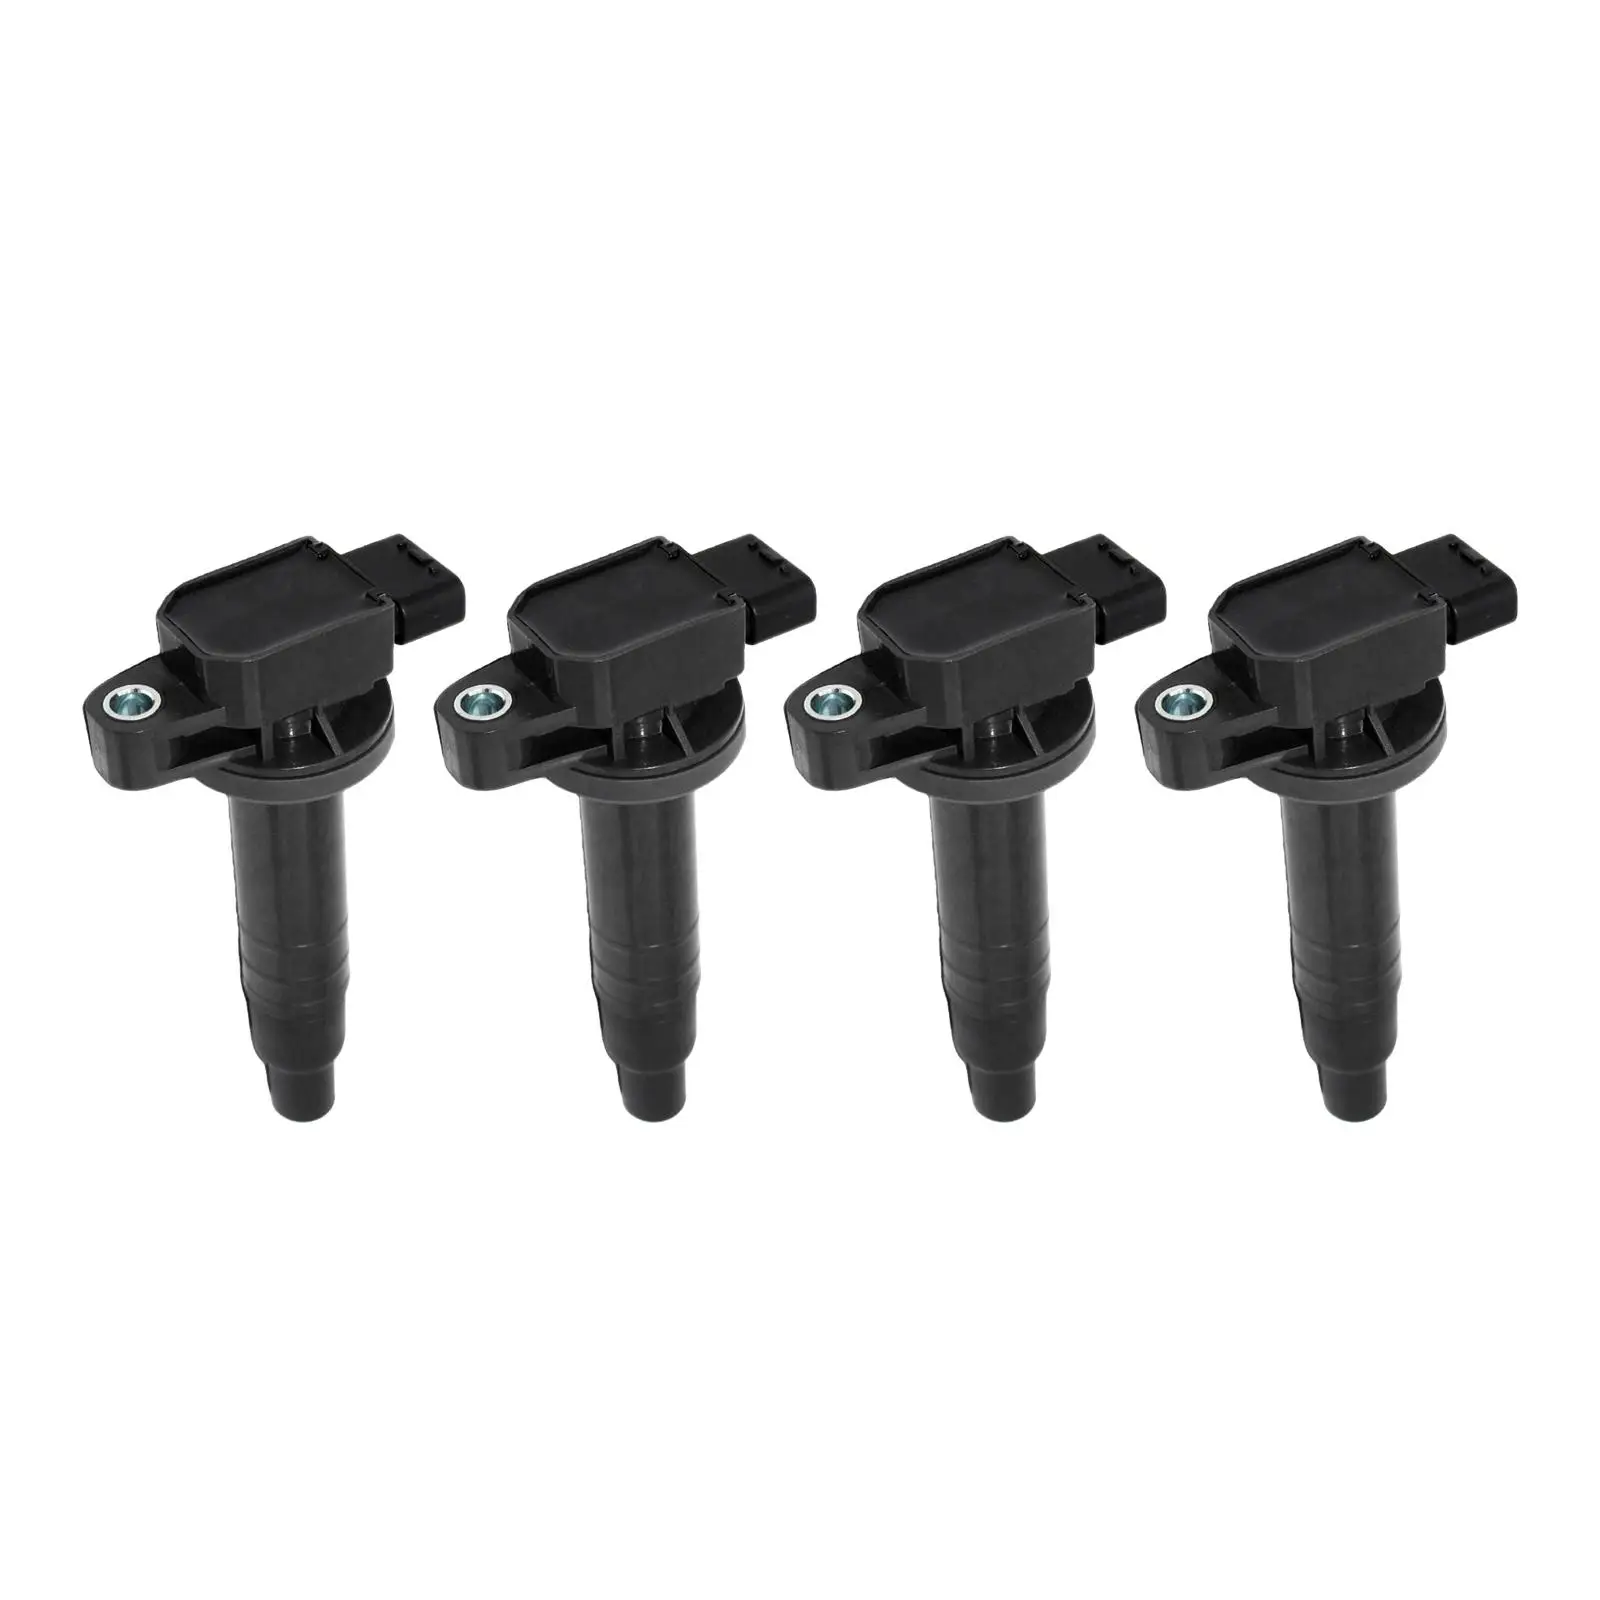 4x Ignition Coils 90919-02240 Professional for Toyota 1.5L Yaris for prius